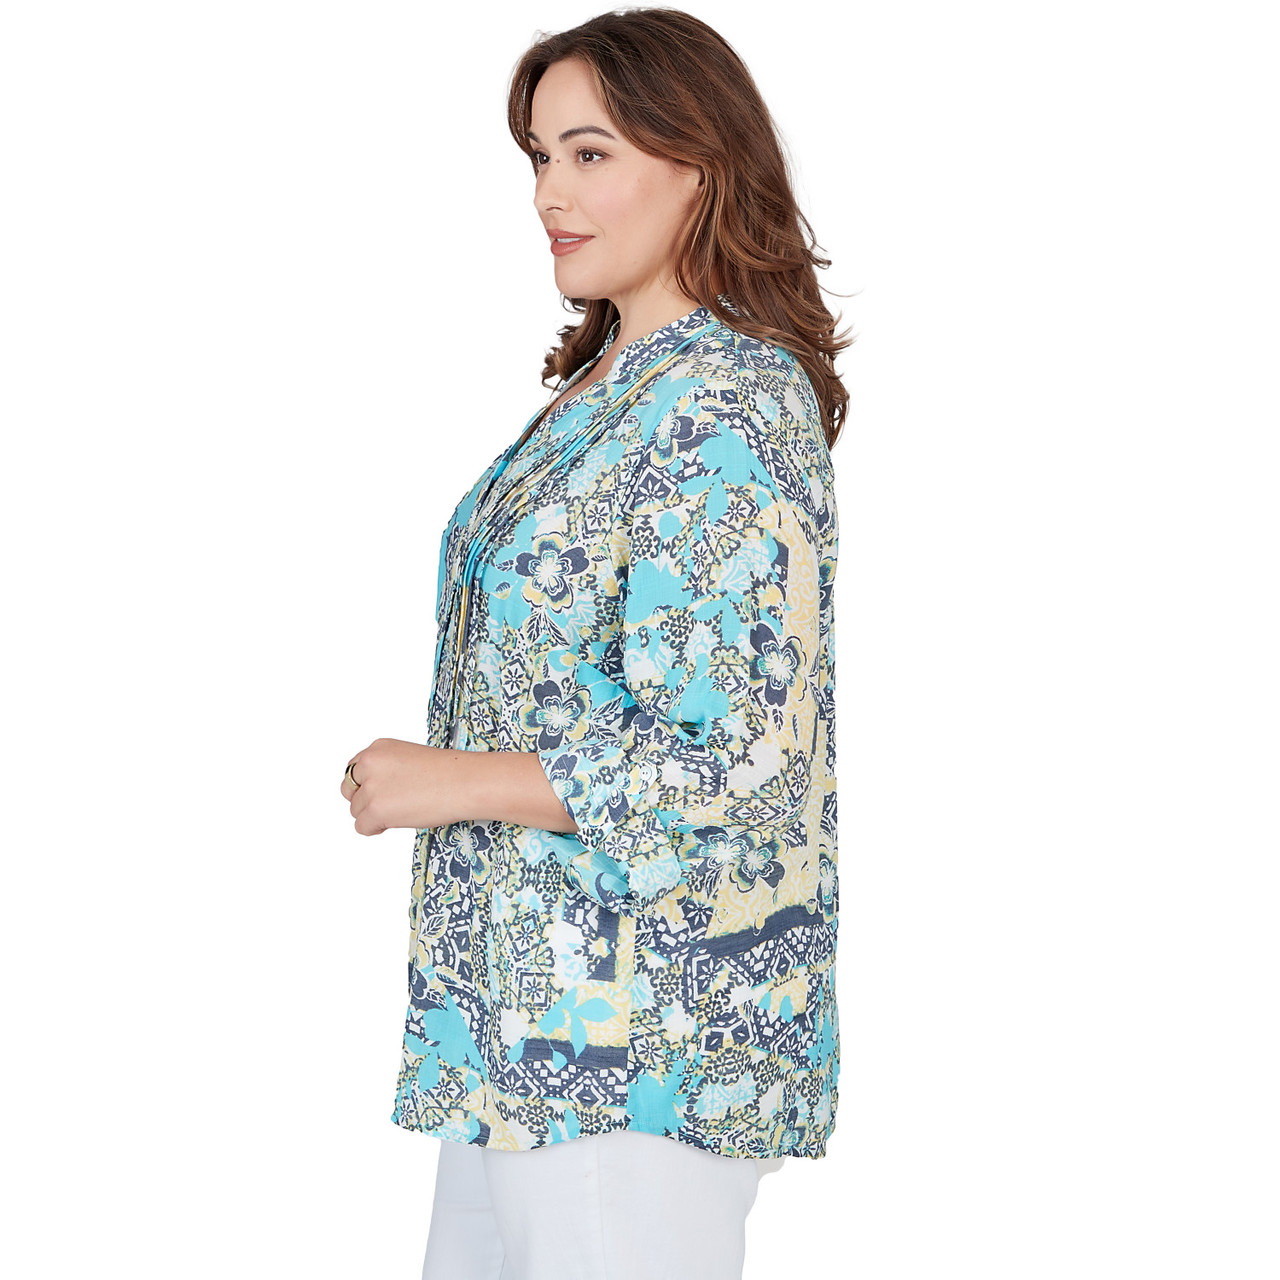 Plus Women's Seaside Silky Gauze Patchwork Button Front Top | Ruby Rd.